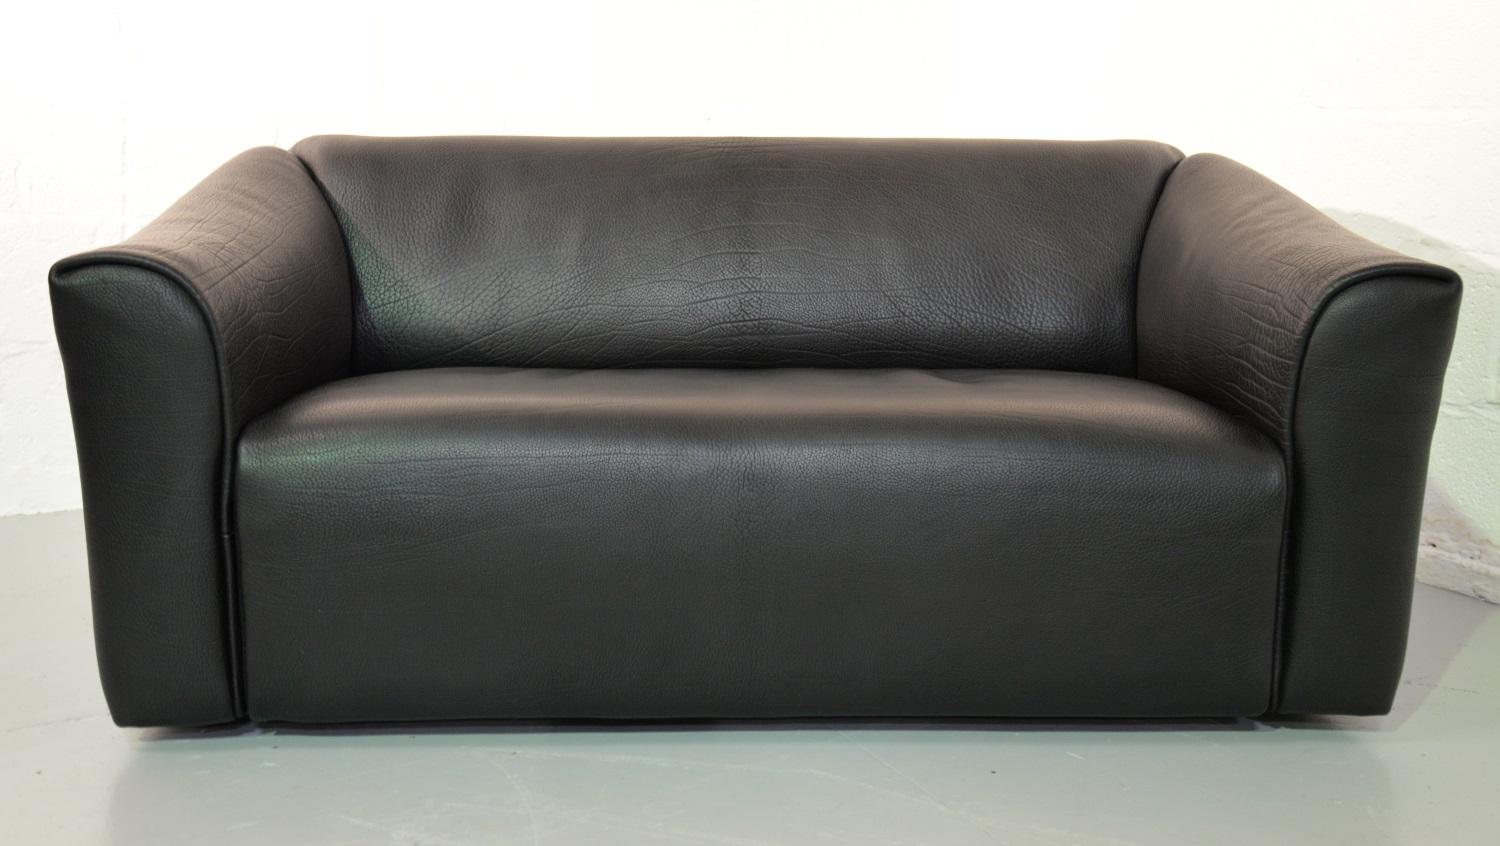 We are delighted to bring to a de Sede DS 47 designer leather sofa in thick black neck leather. Handmade by de Sede craftsman in Switzerland with the highest quality buffalo leather in a stunning black color. The seating can be extended by easily